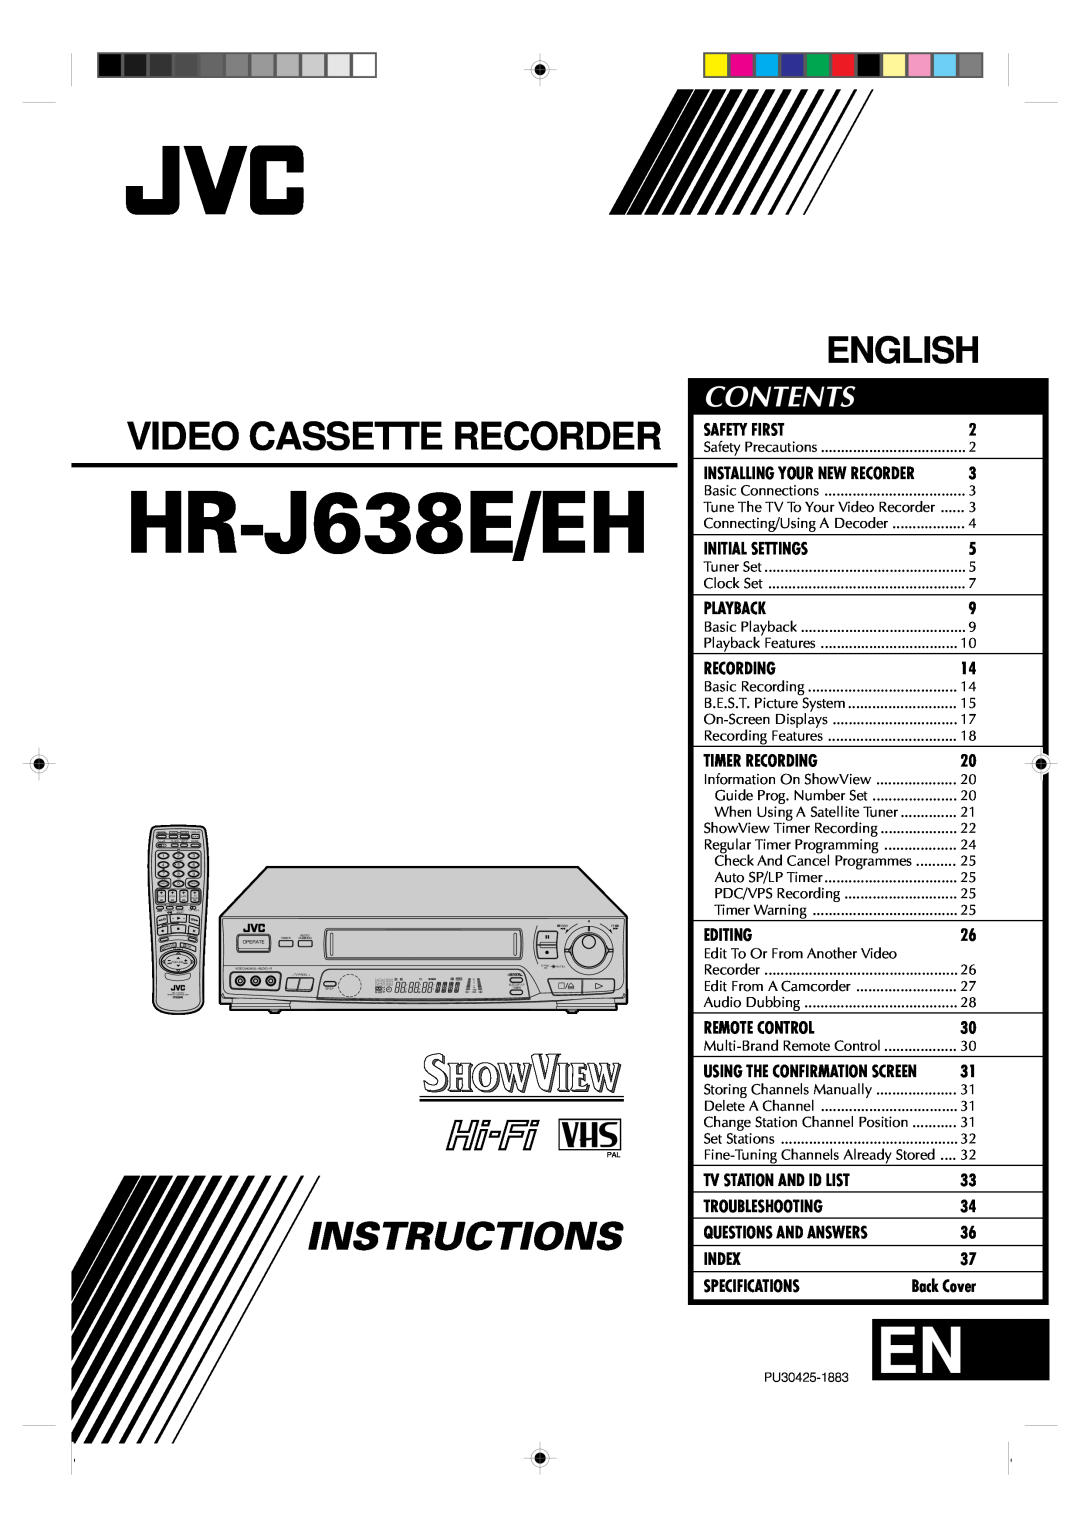 JVC HR-J638E/EH specifications Video Cassette Recorder, Instructions, English, Contents 